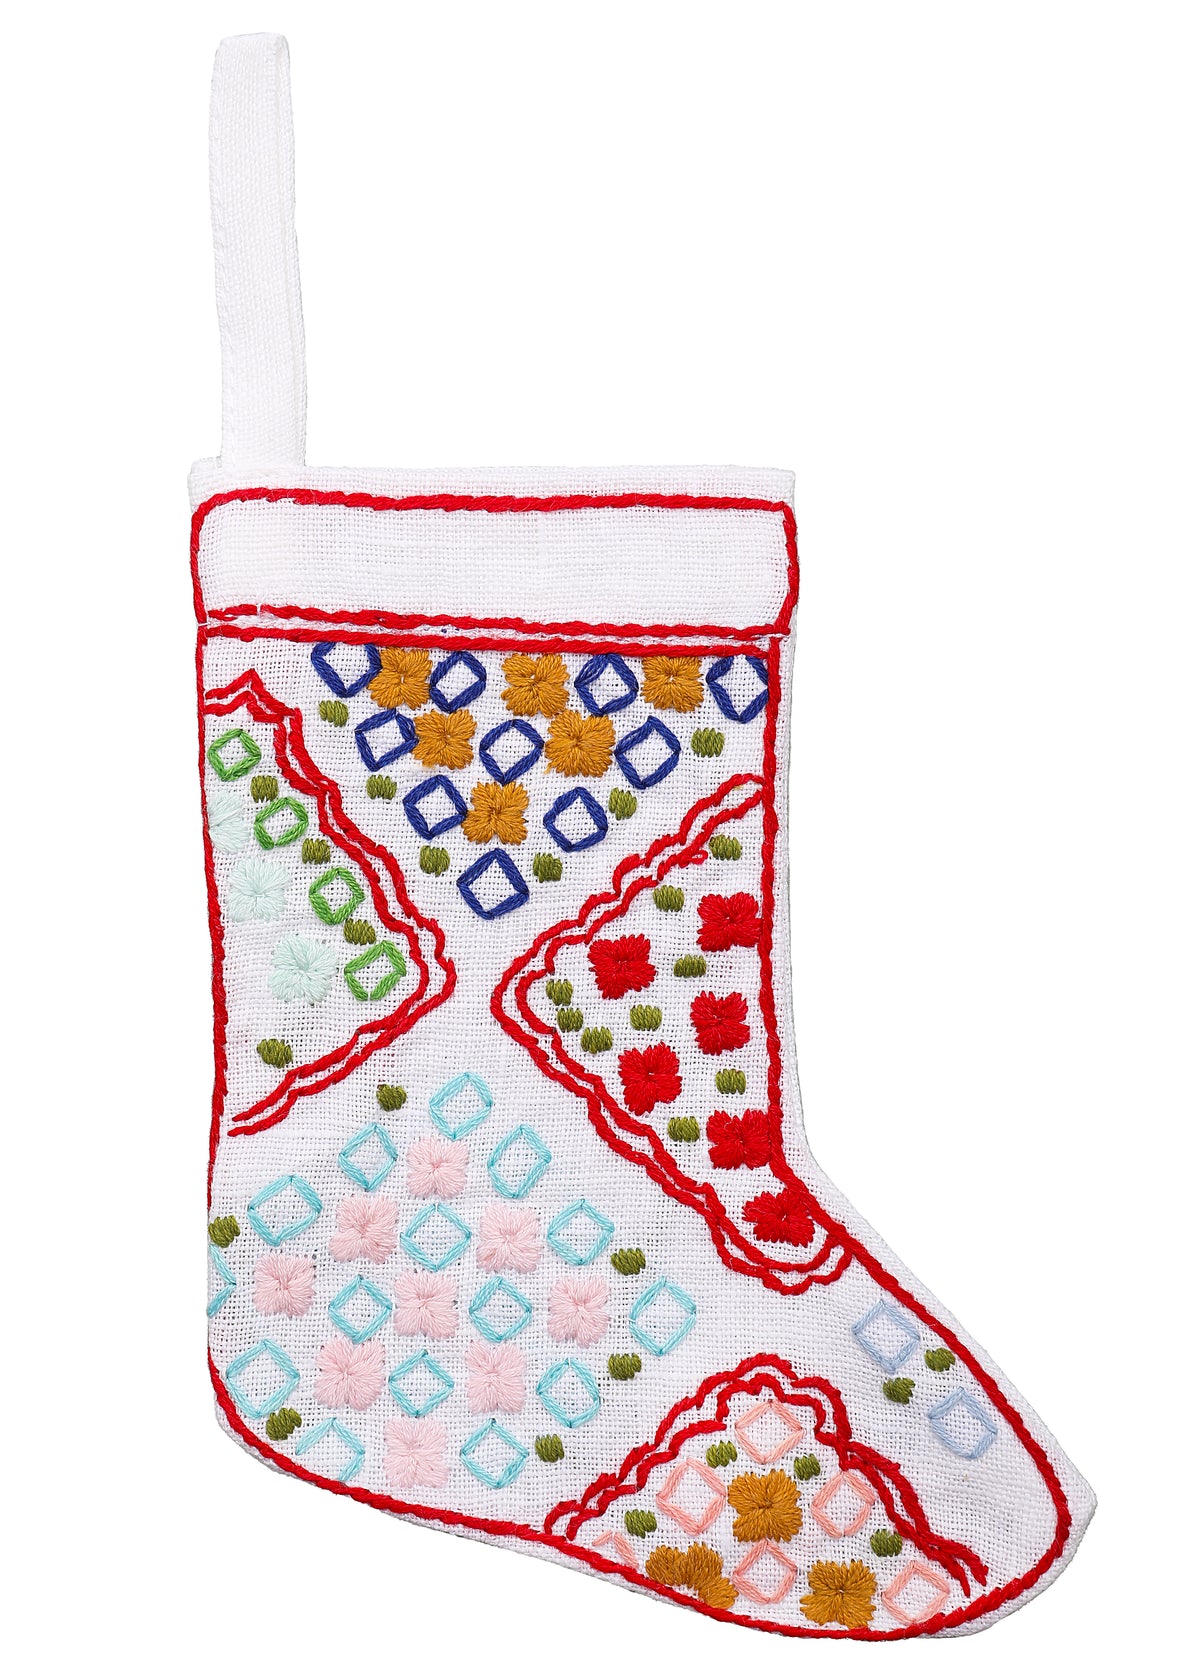 Christmas Mini Stockings Ornament Hand Embroidered, Set of 6